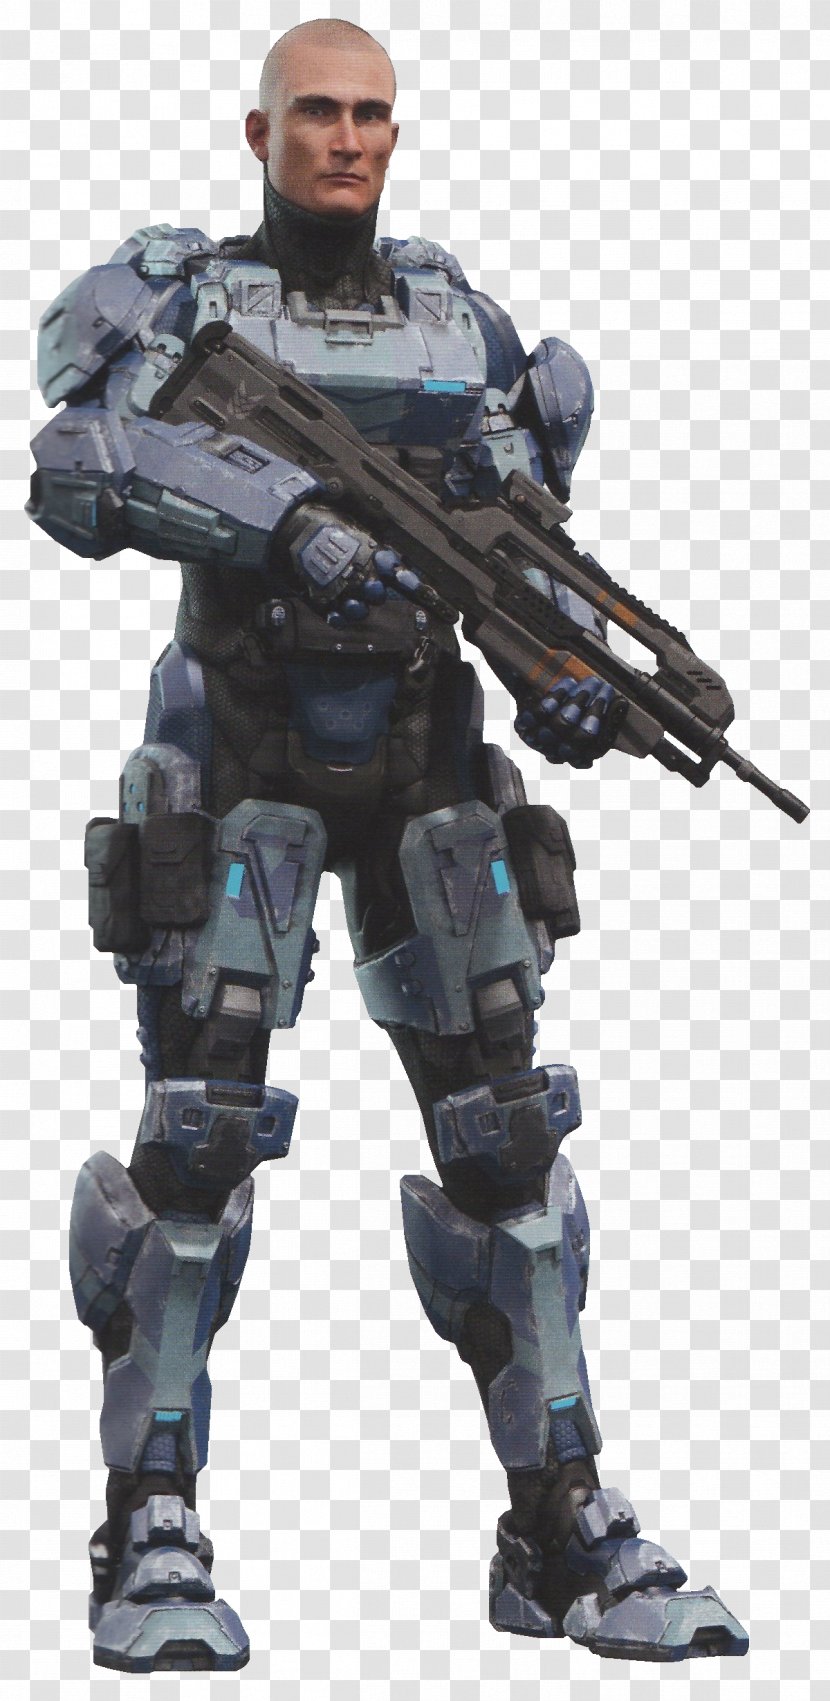 Halo 4 Halo: Spartan Assault Master Chief 5: Guardians 3 - Personal Protective Equipment Transparent PNG